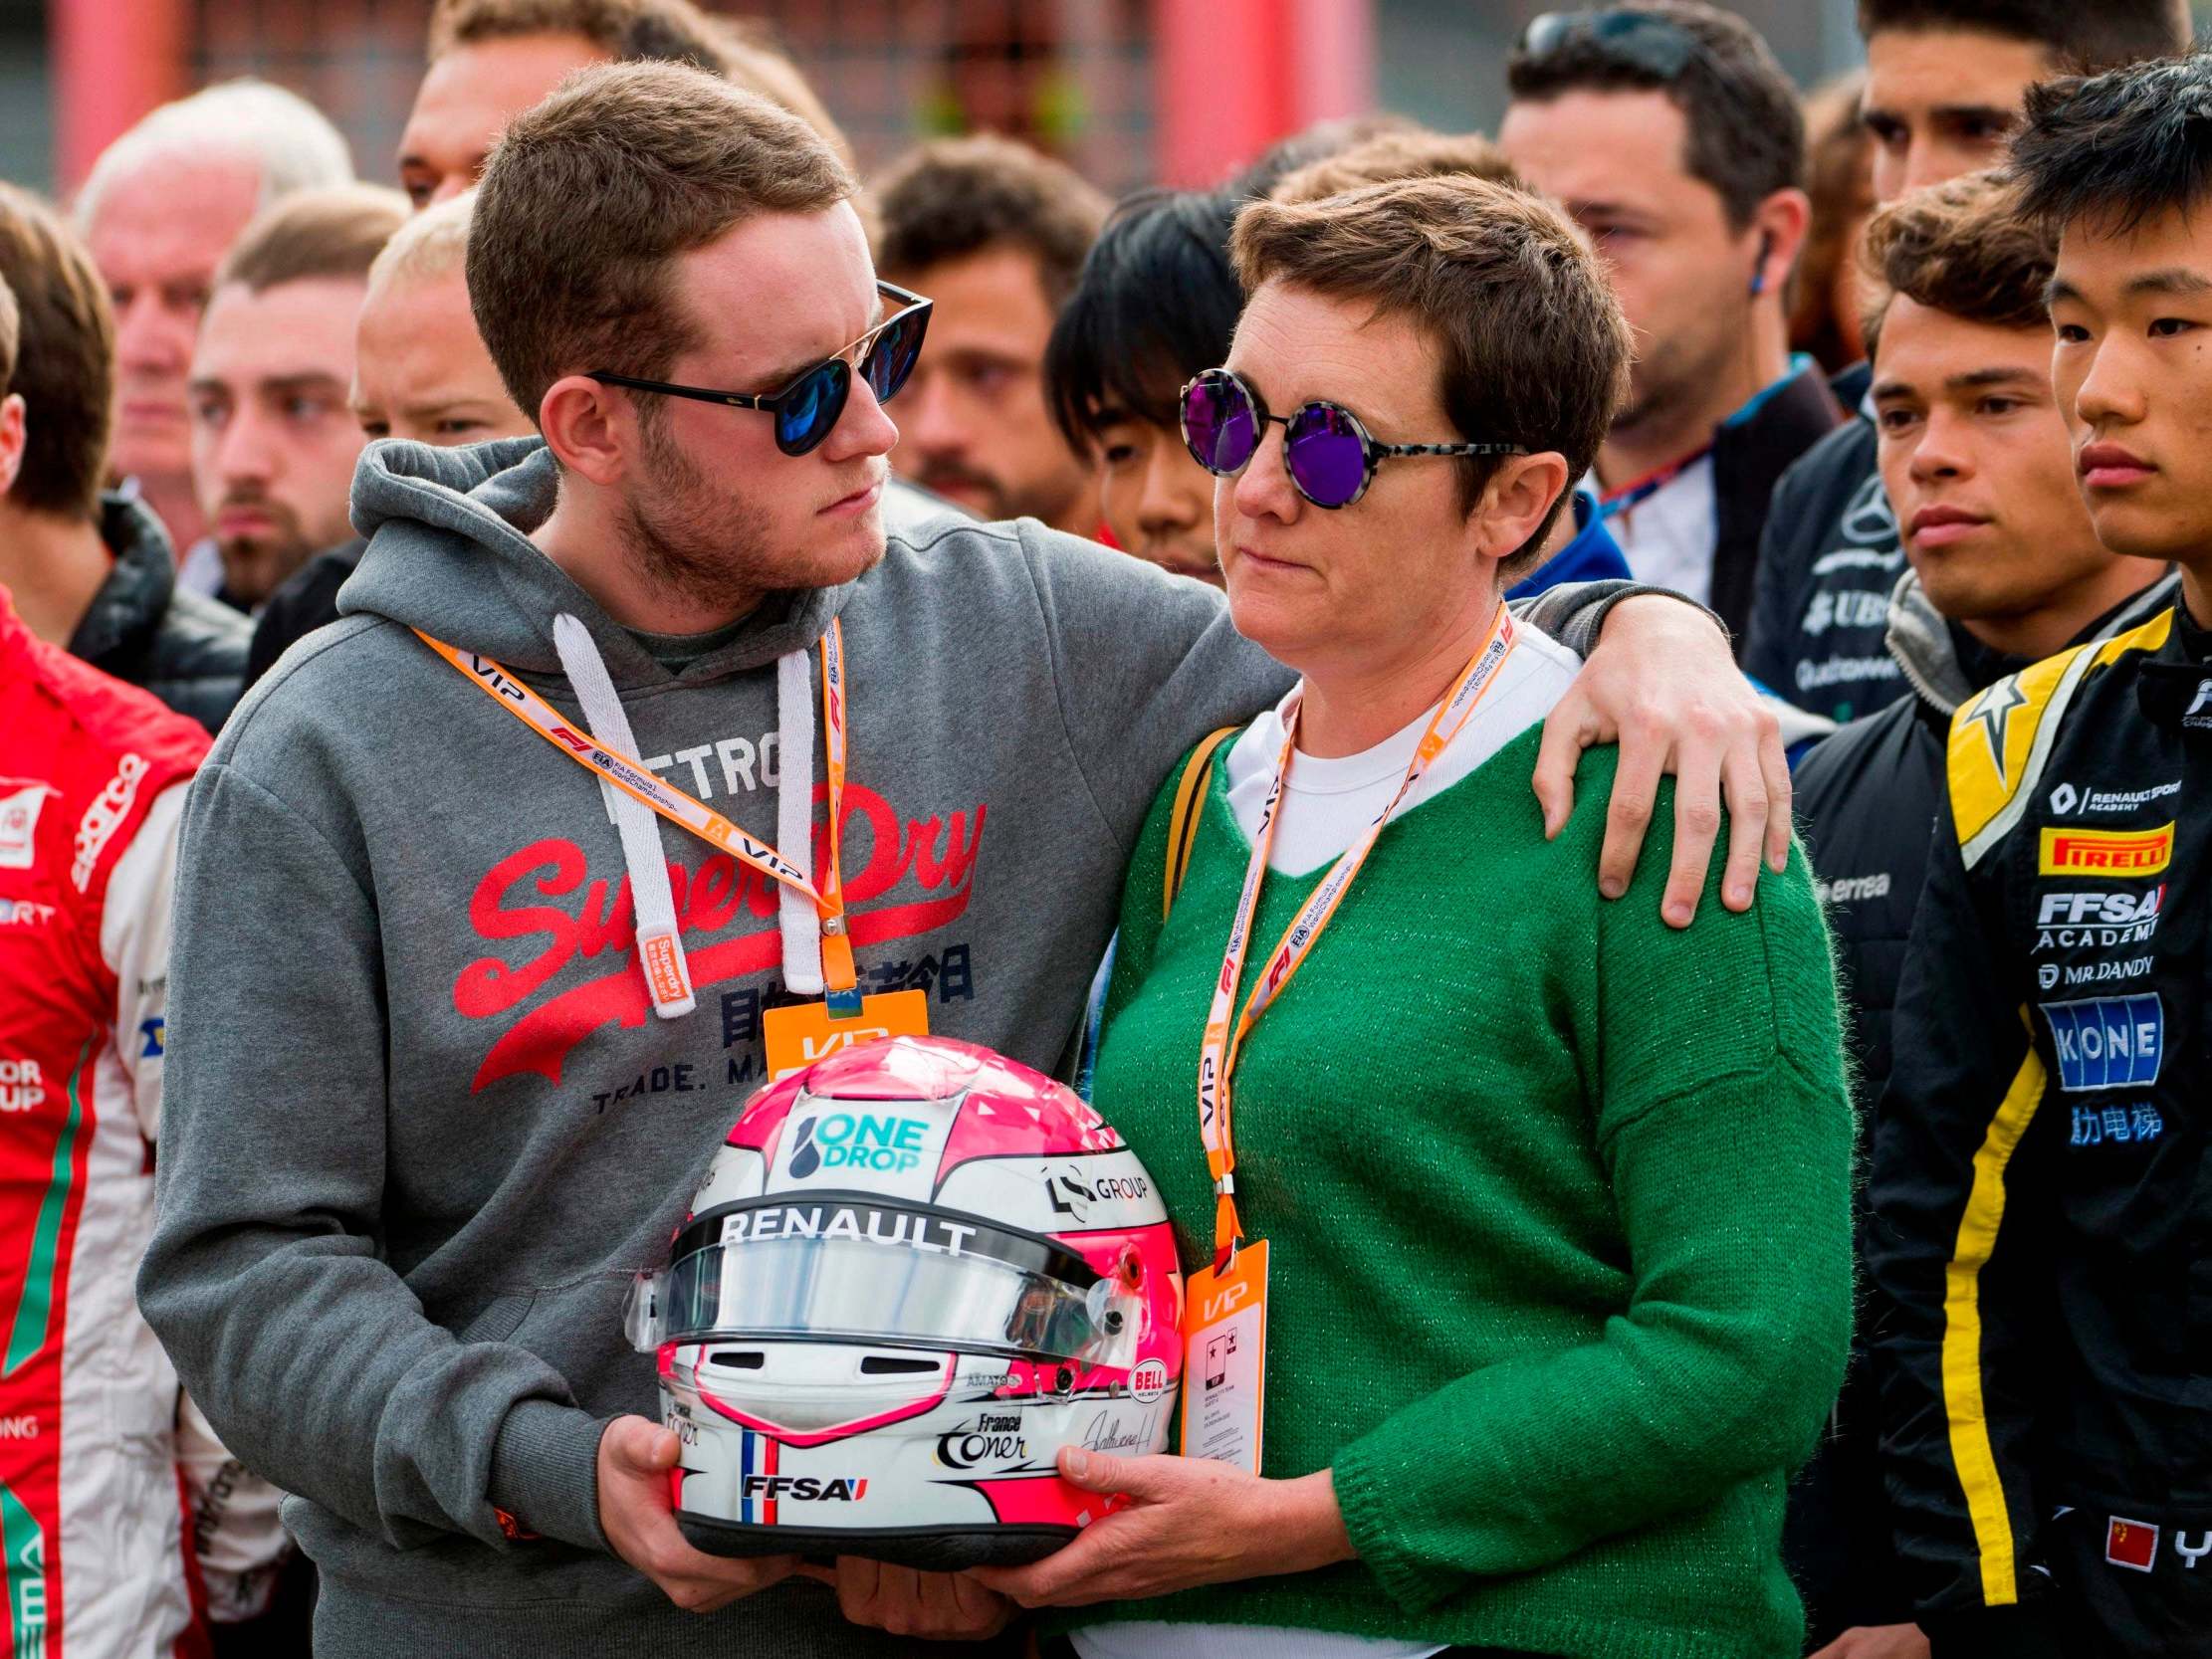 The brother and mother of Anthoine Hubert observe a minute’s silence after the F2 driver’s death